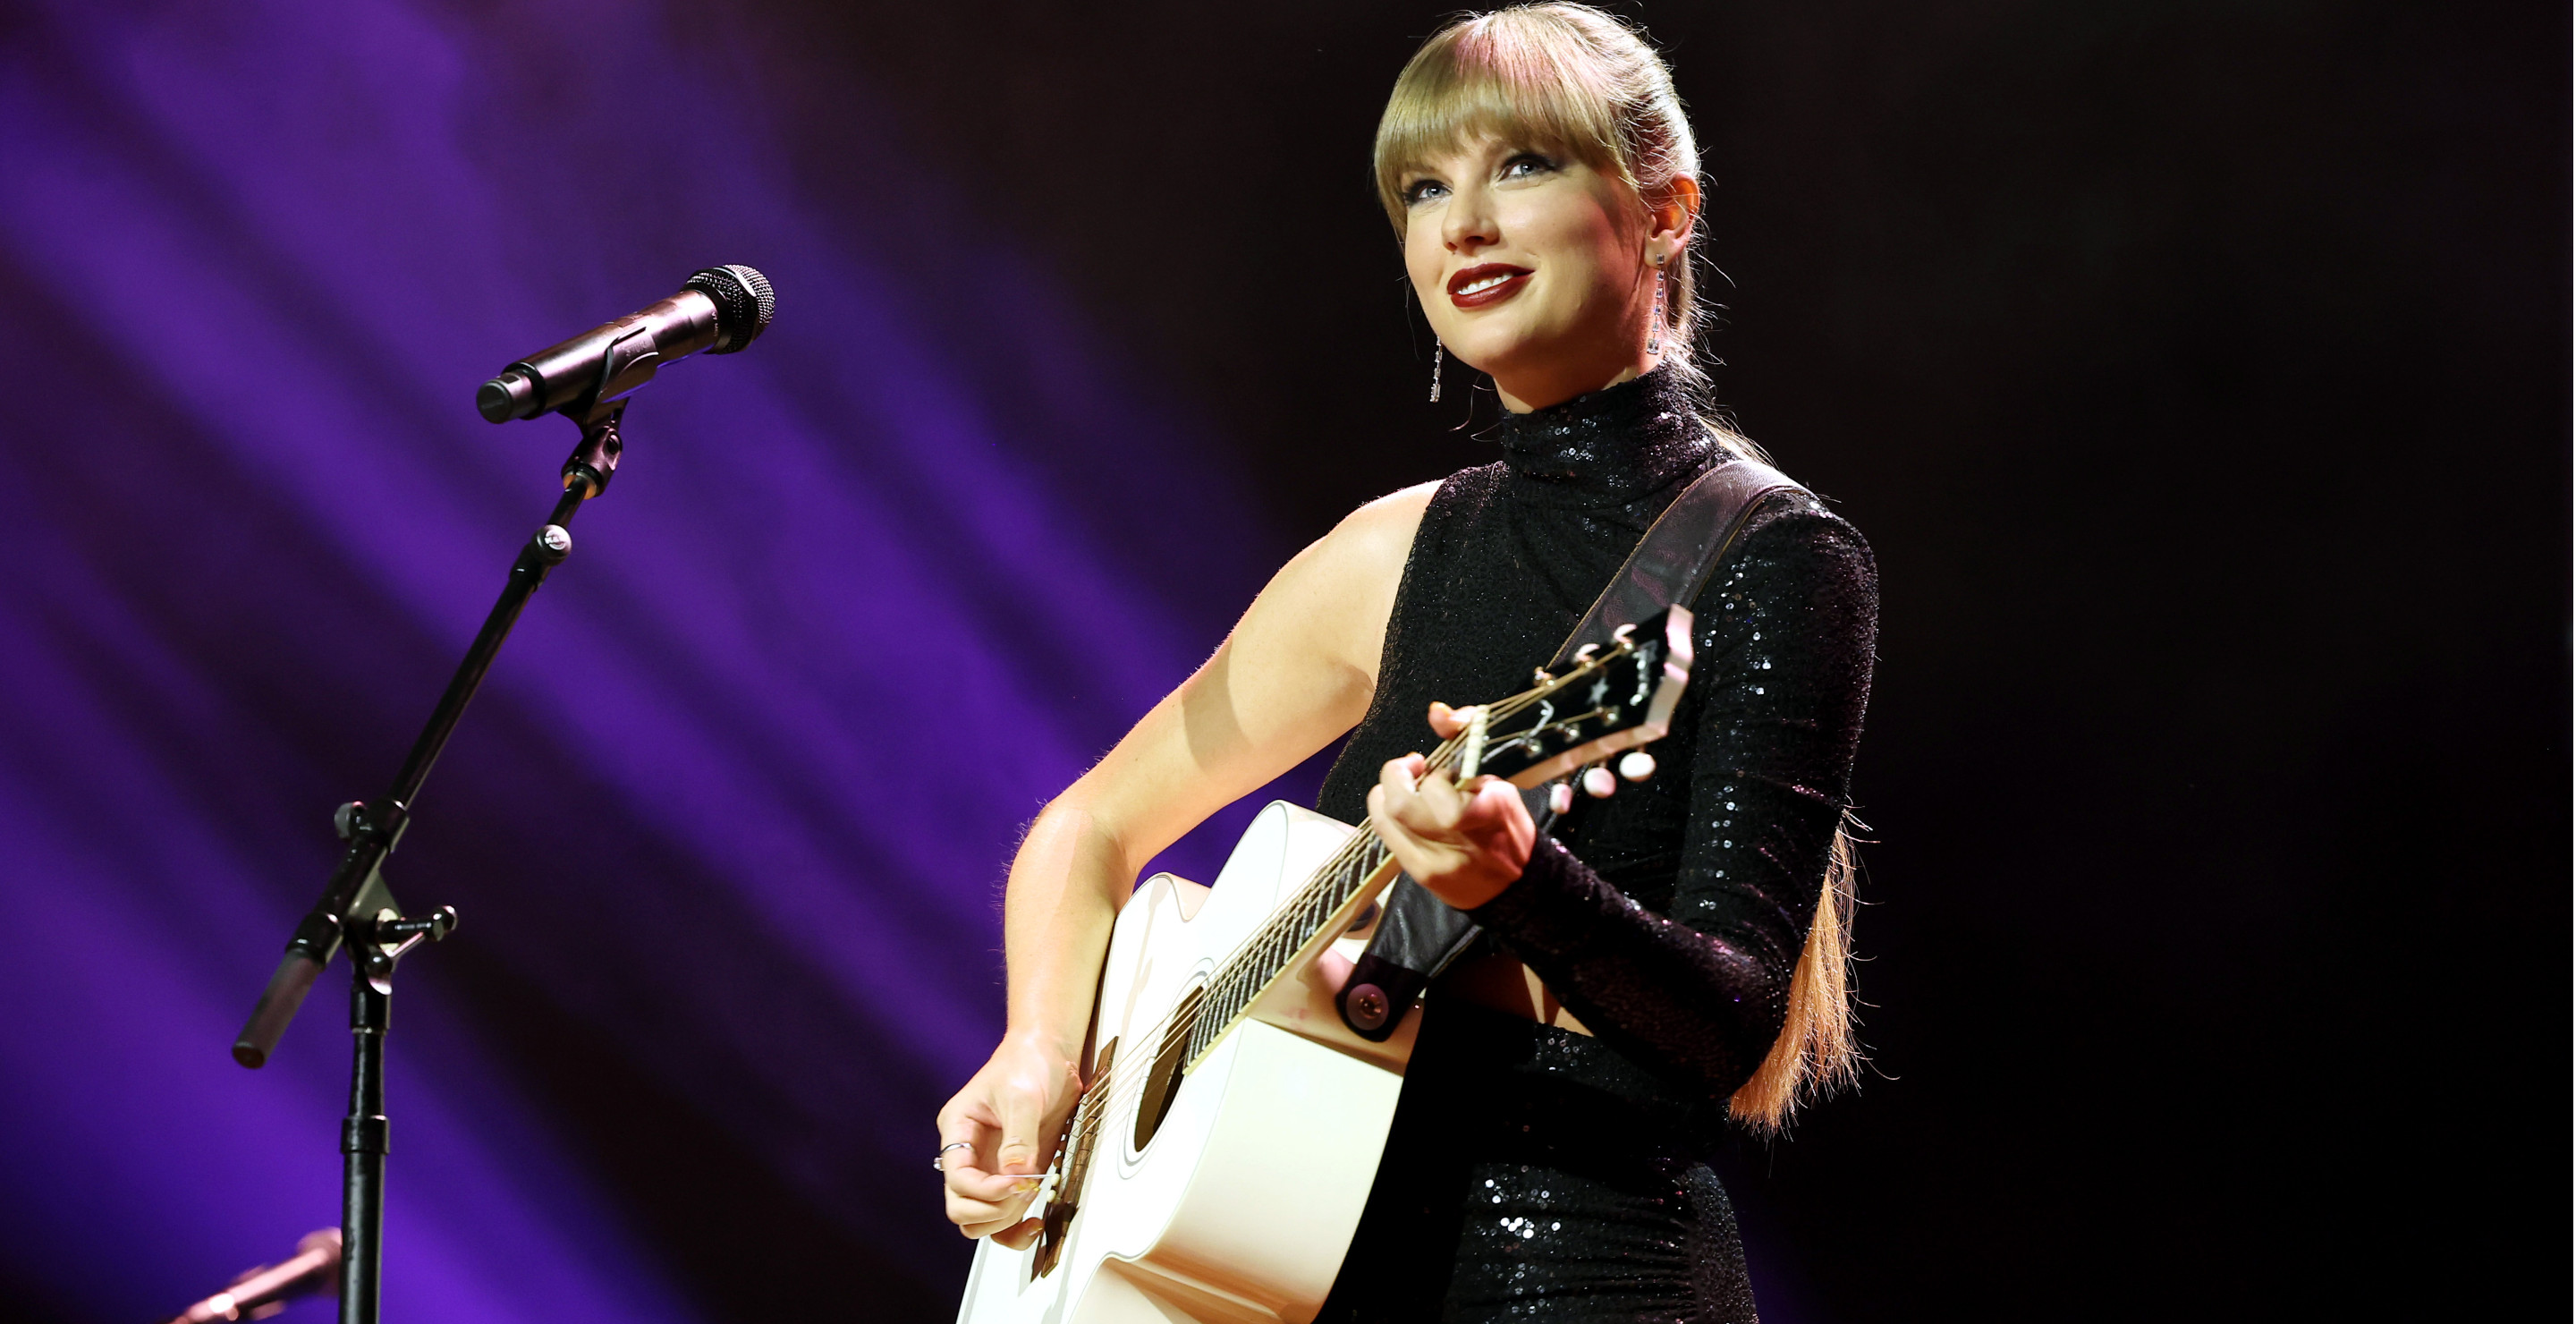 Taylor Swift Fans Have Raised Nearly $10,000 For Bride-To-Be After She Tried to Sell Autographed Guitar